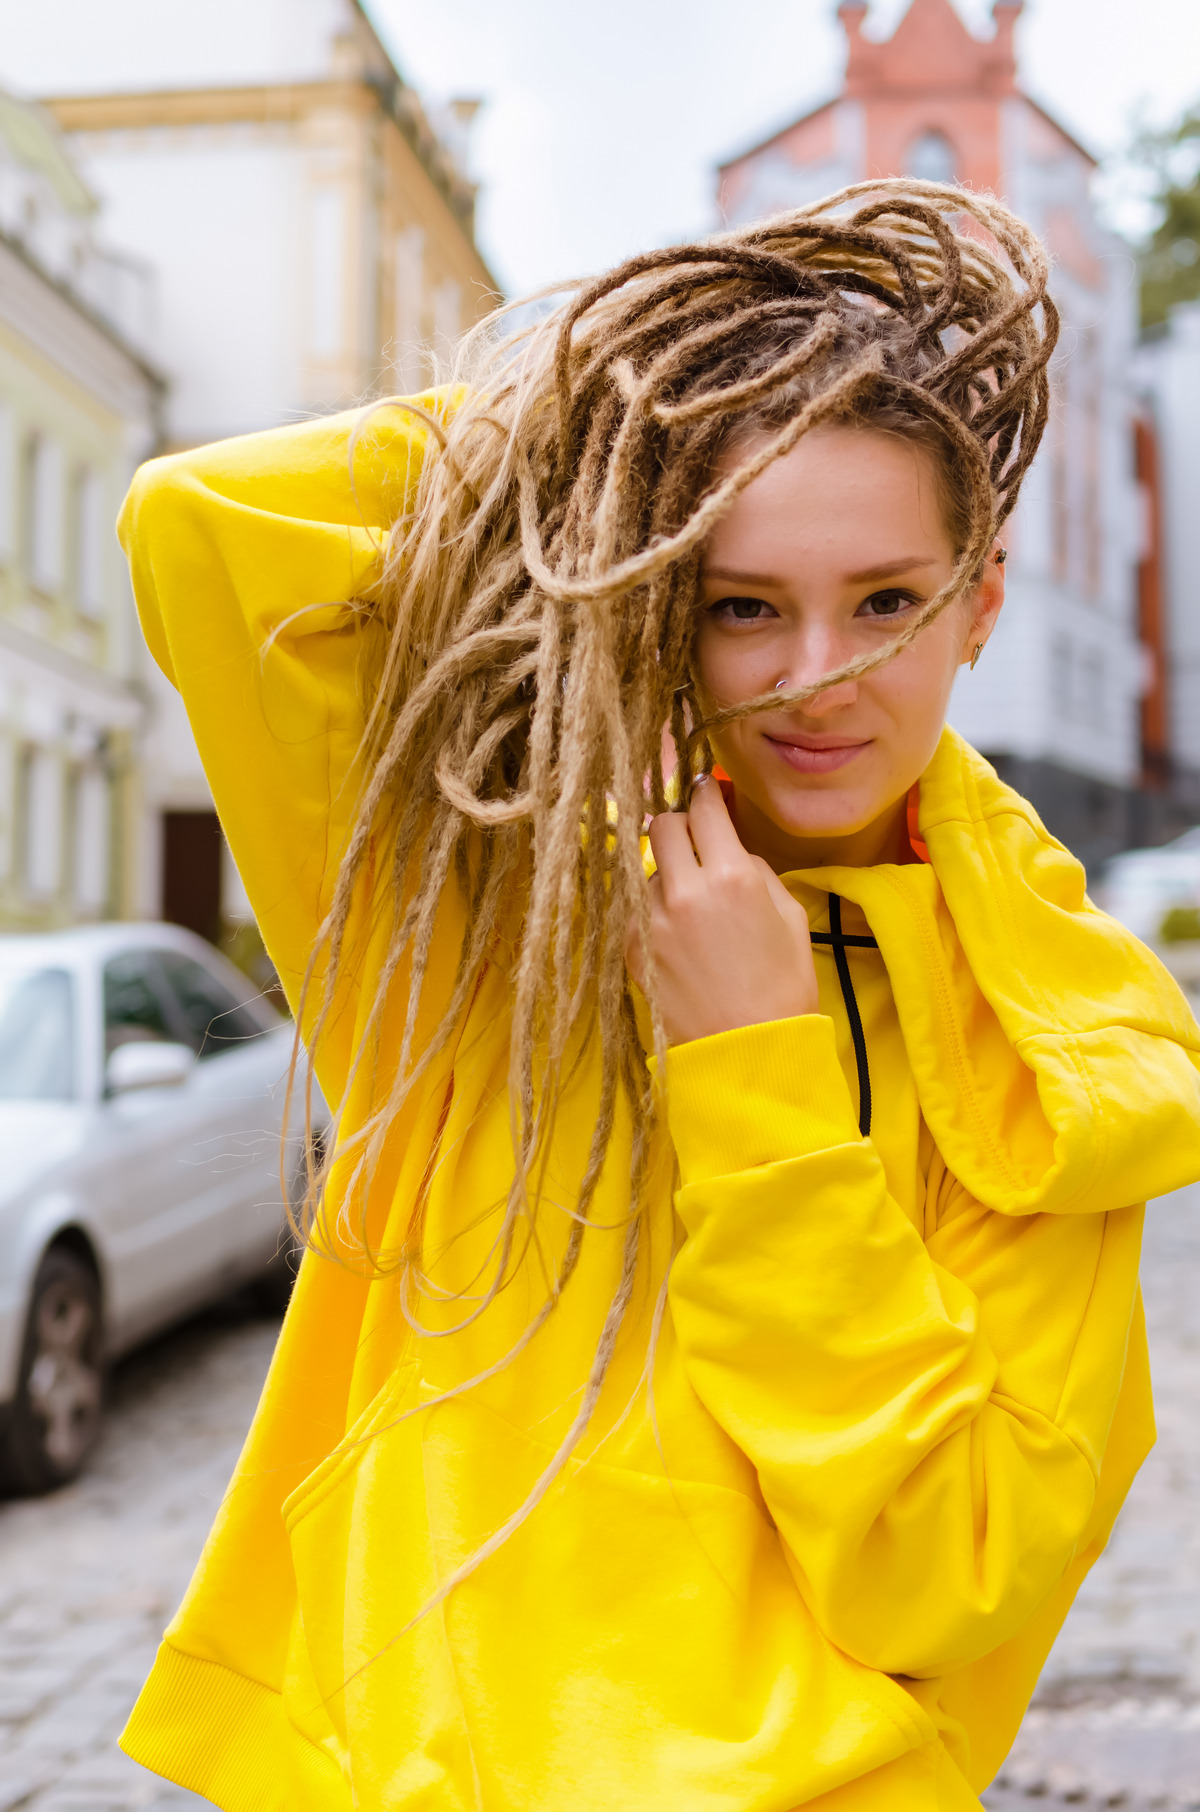 Young woman with dreadlocks in a yellow hoodie in the city street